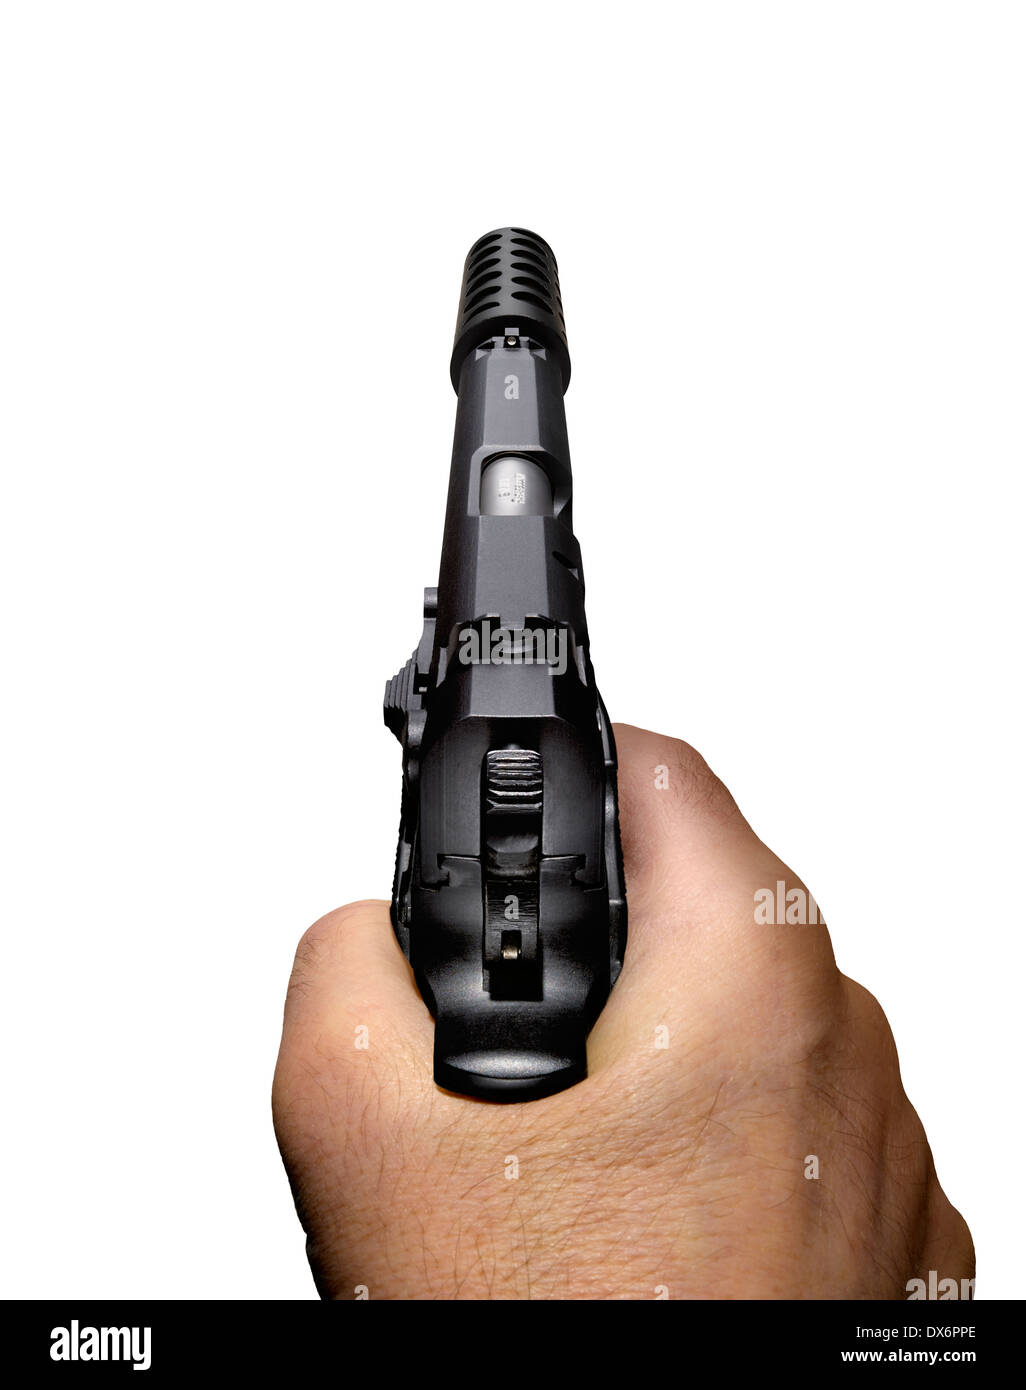 A cut out shot of a hand holding and pointing a hand gun with silencer attached. Stock Photo